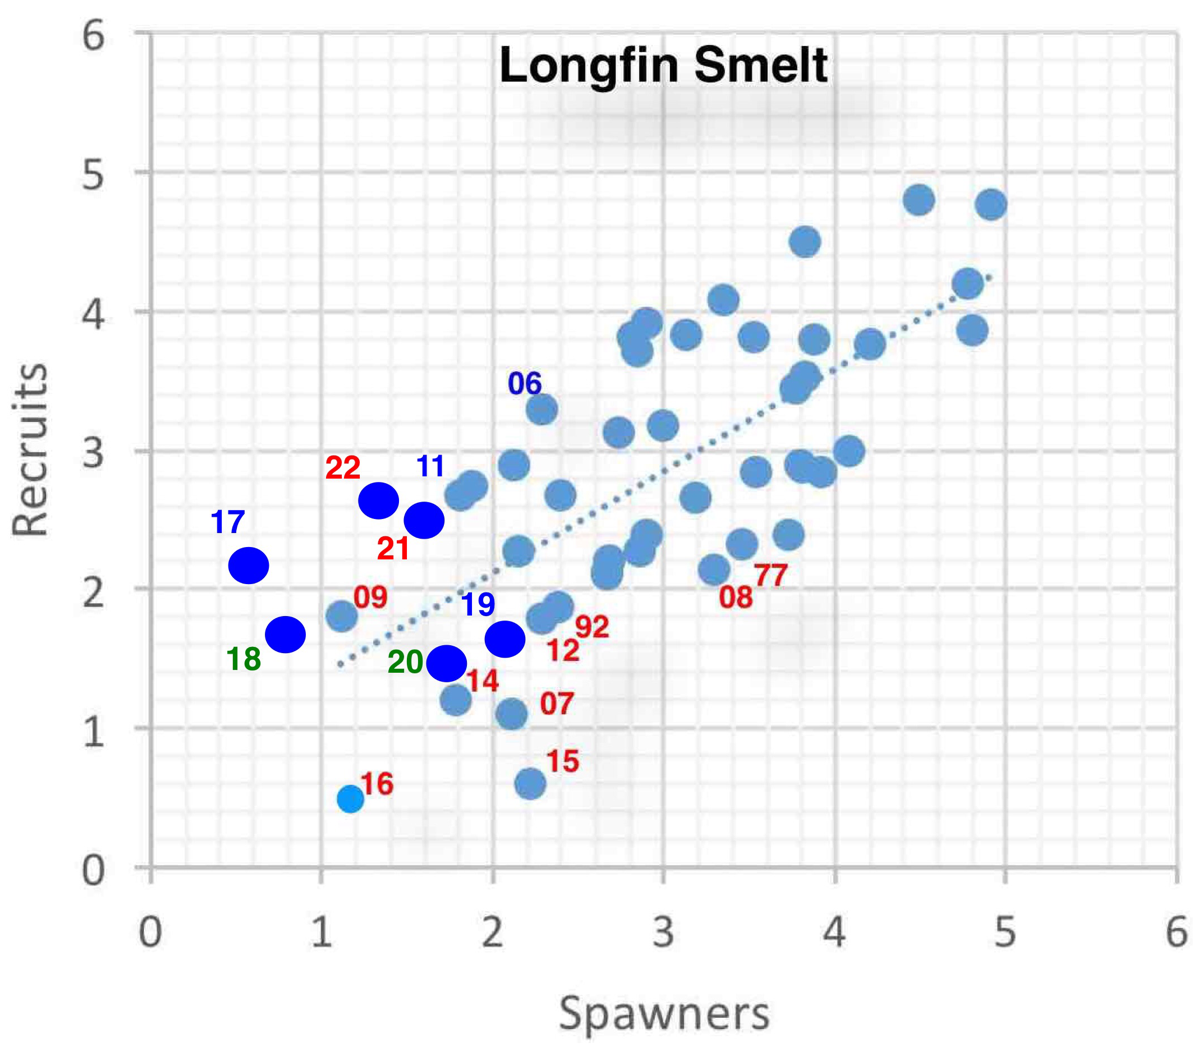 Figure 3. Log-Log relationship for longfin smelt index year (number shown are brood year “recruits”) vs index two years prior (spawners). Red numbers represent brood years that were the product of dry water years, green numbers = normal water years, and blue = wet water years. Blue dots are six most recent years, 2017-2022: fewer spawners produce fewer recruits.